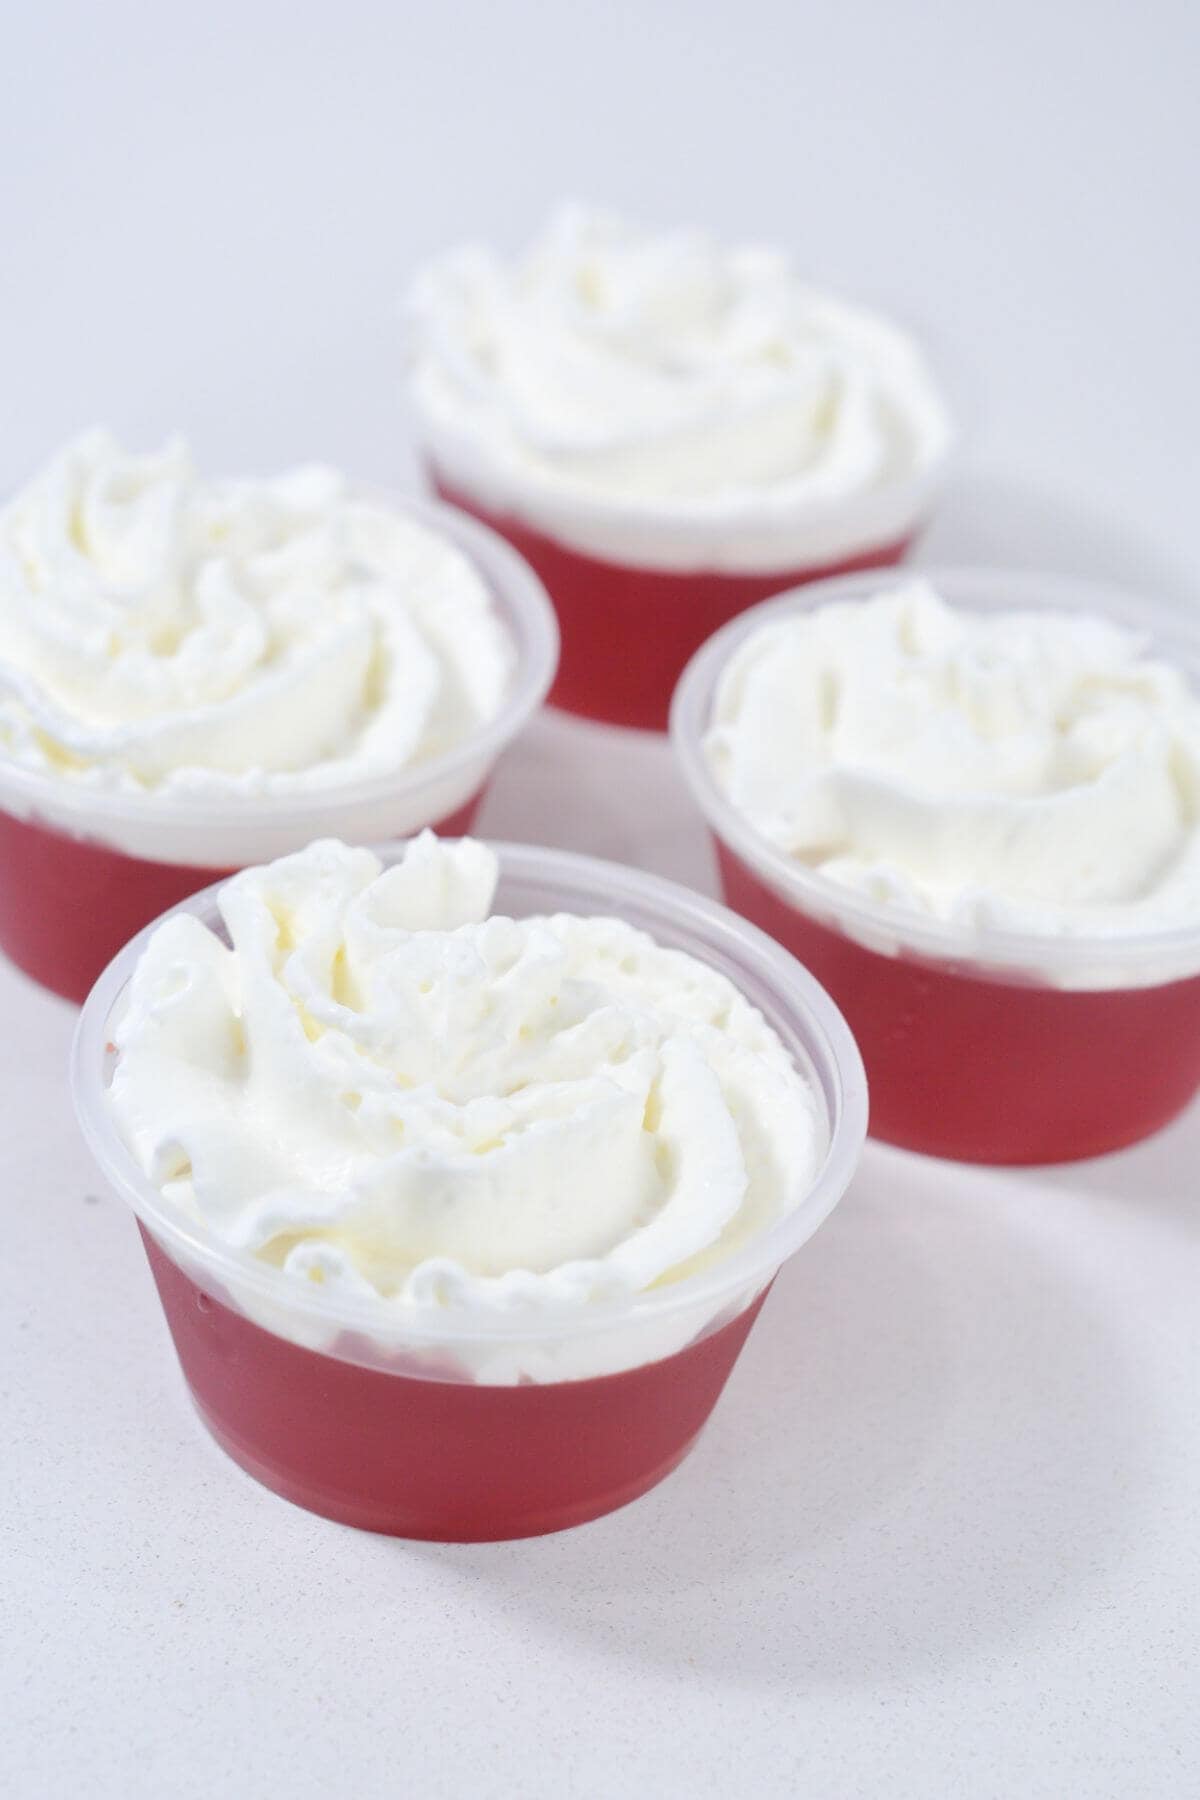 Four red gelatin cups with whipped cream.